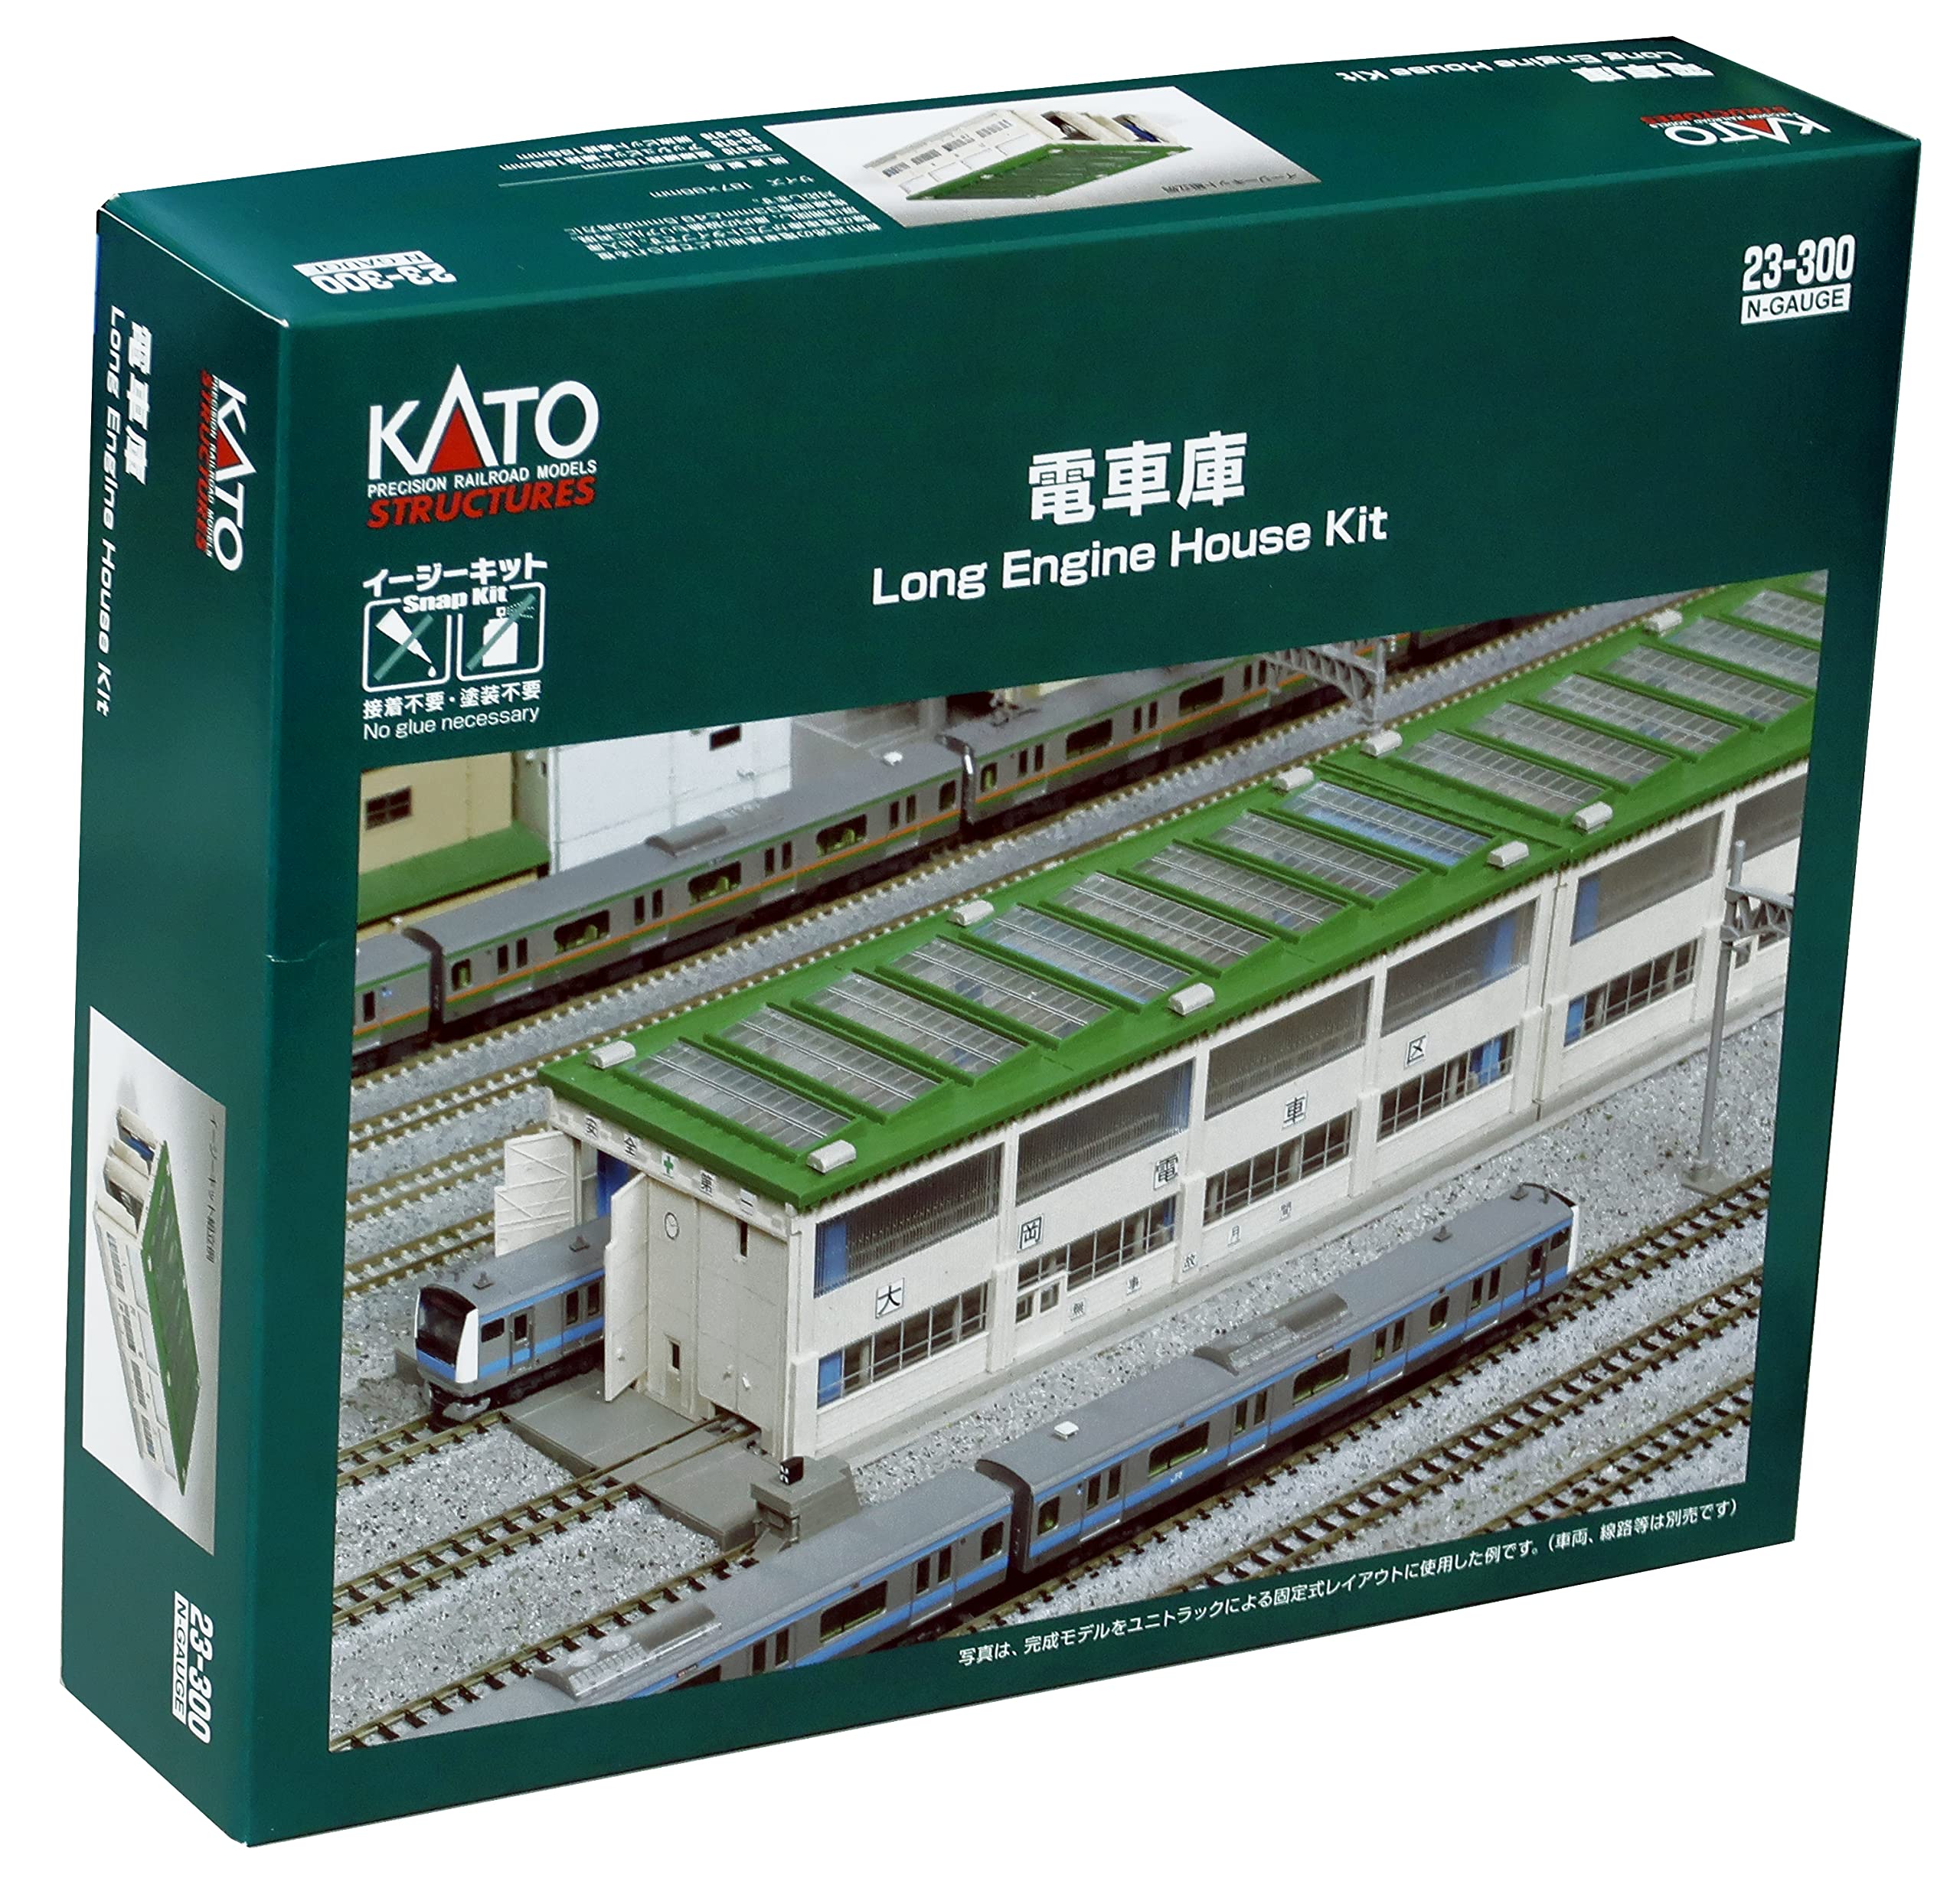 Kato N Scale Building/Structure Kit Long Engine House